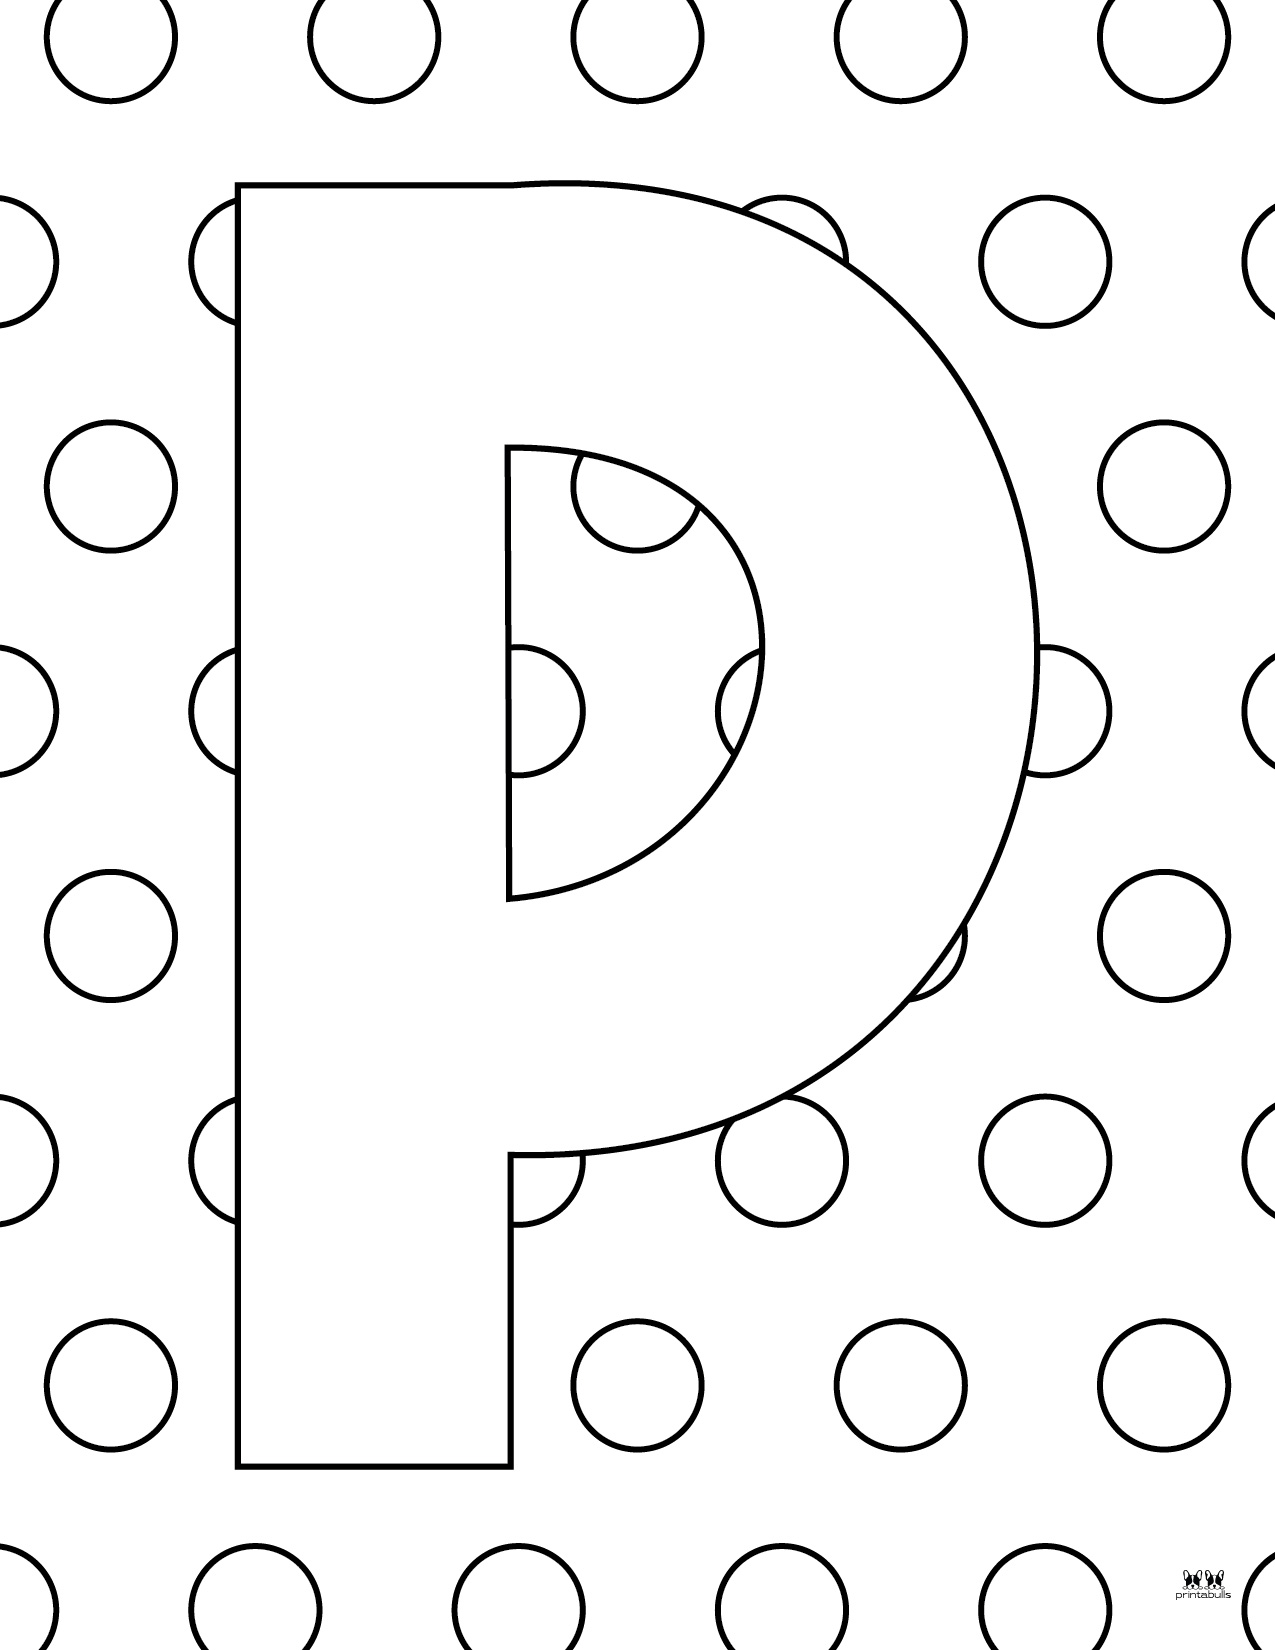 Letter P Coloring Pages - 15 FREE Pages | Printabulls